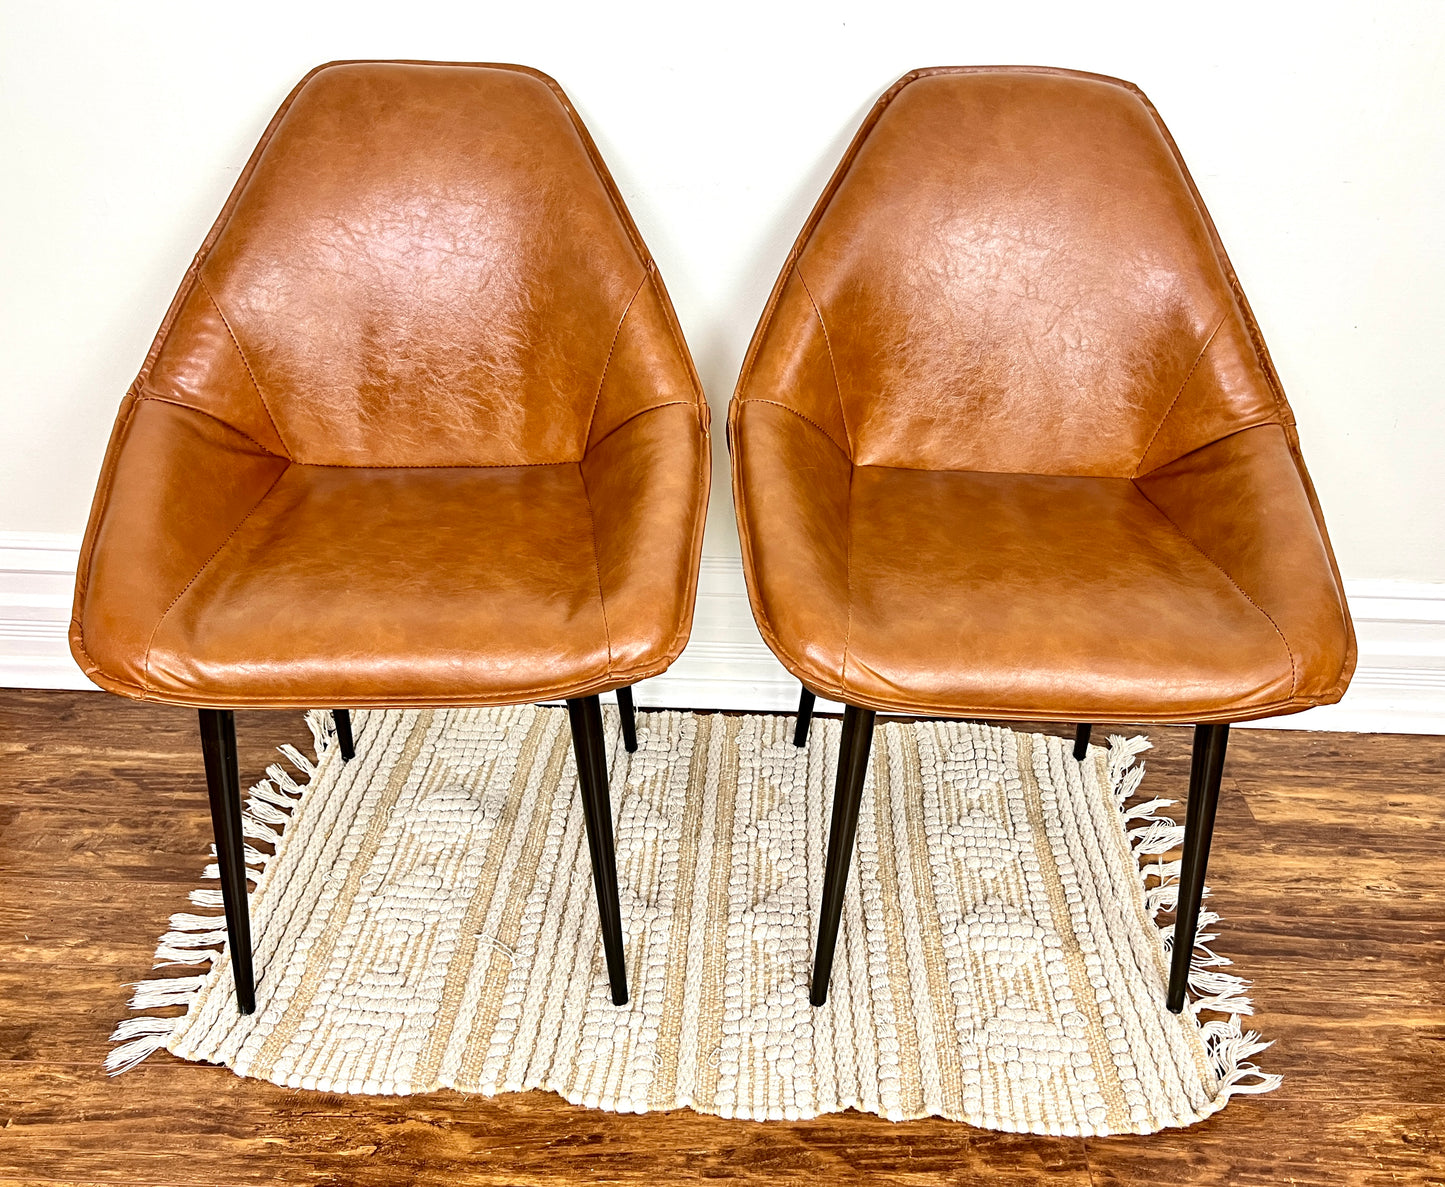 The Reno Sands Chairs